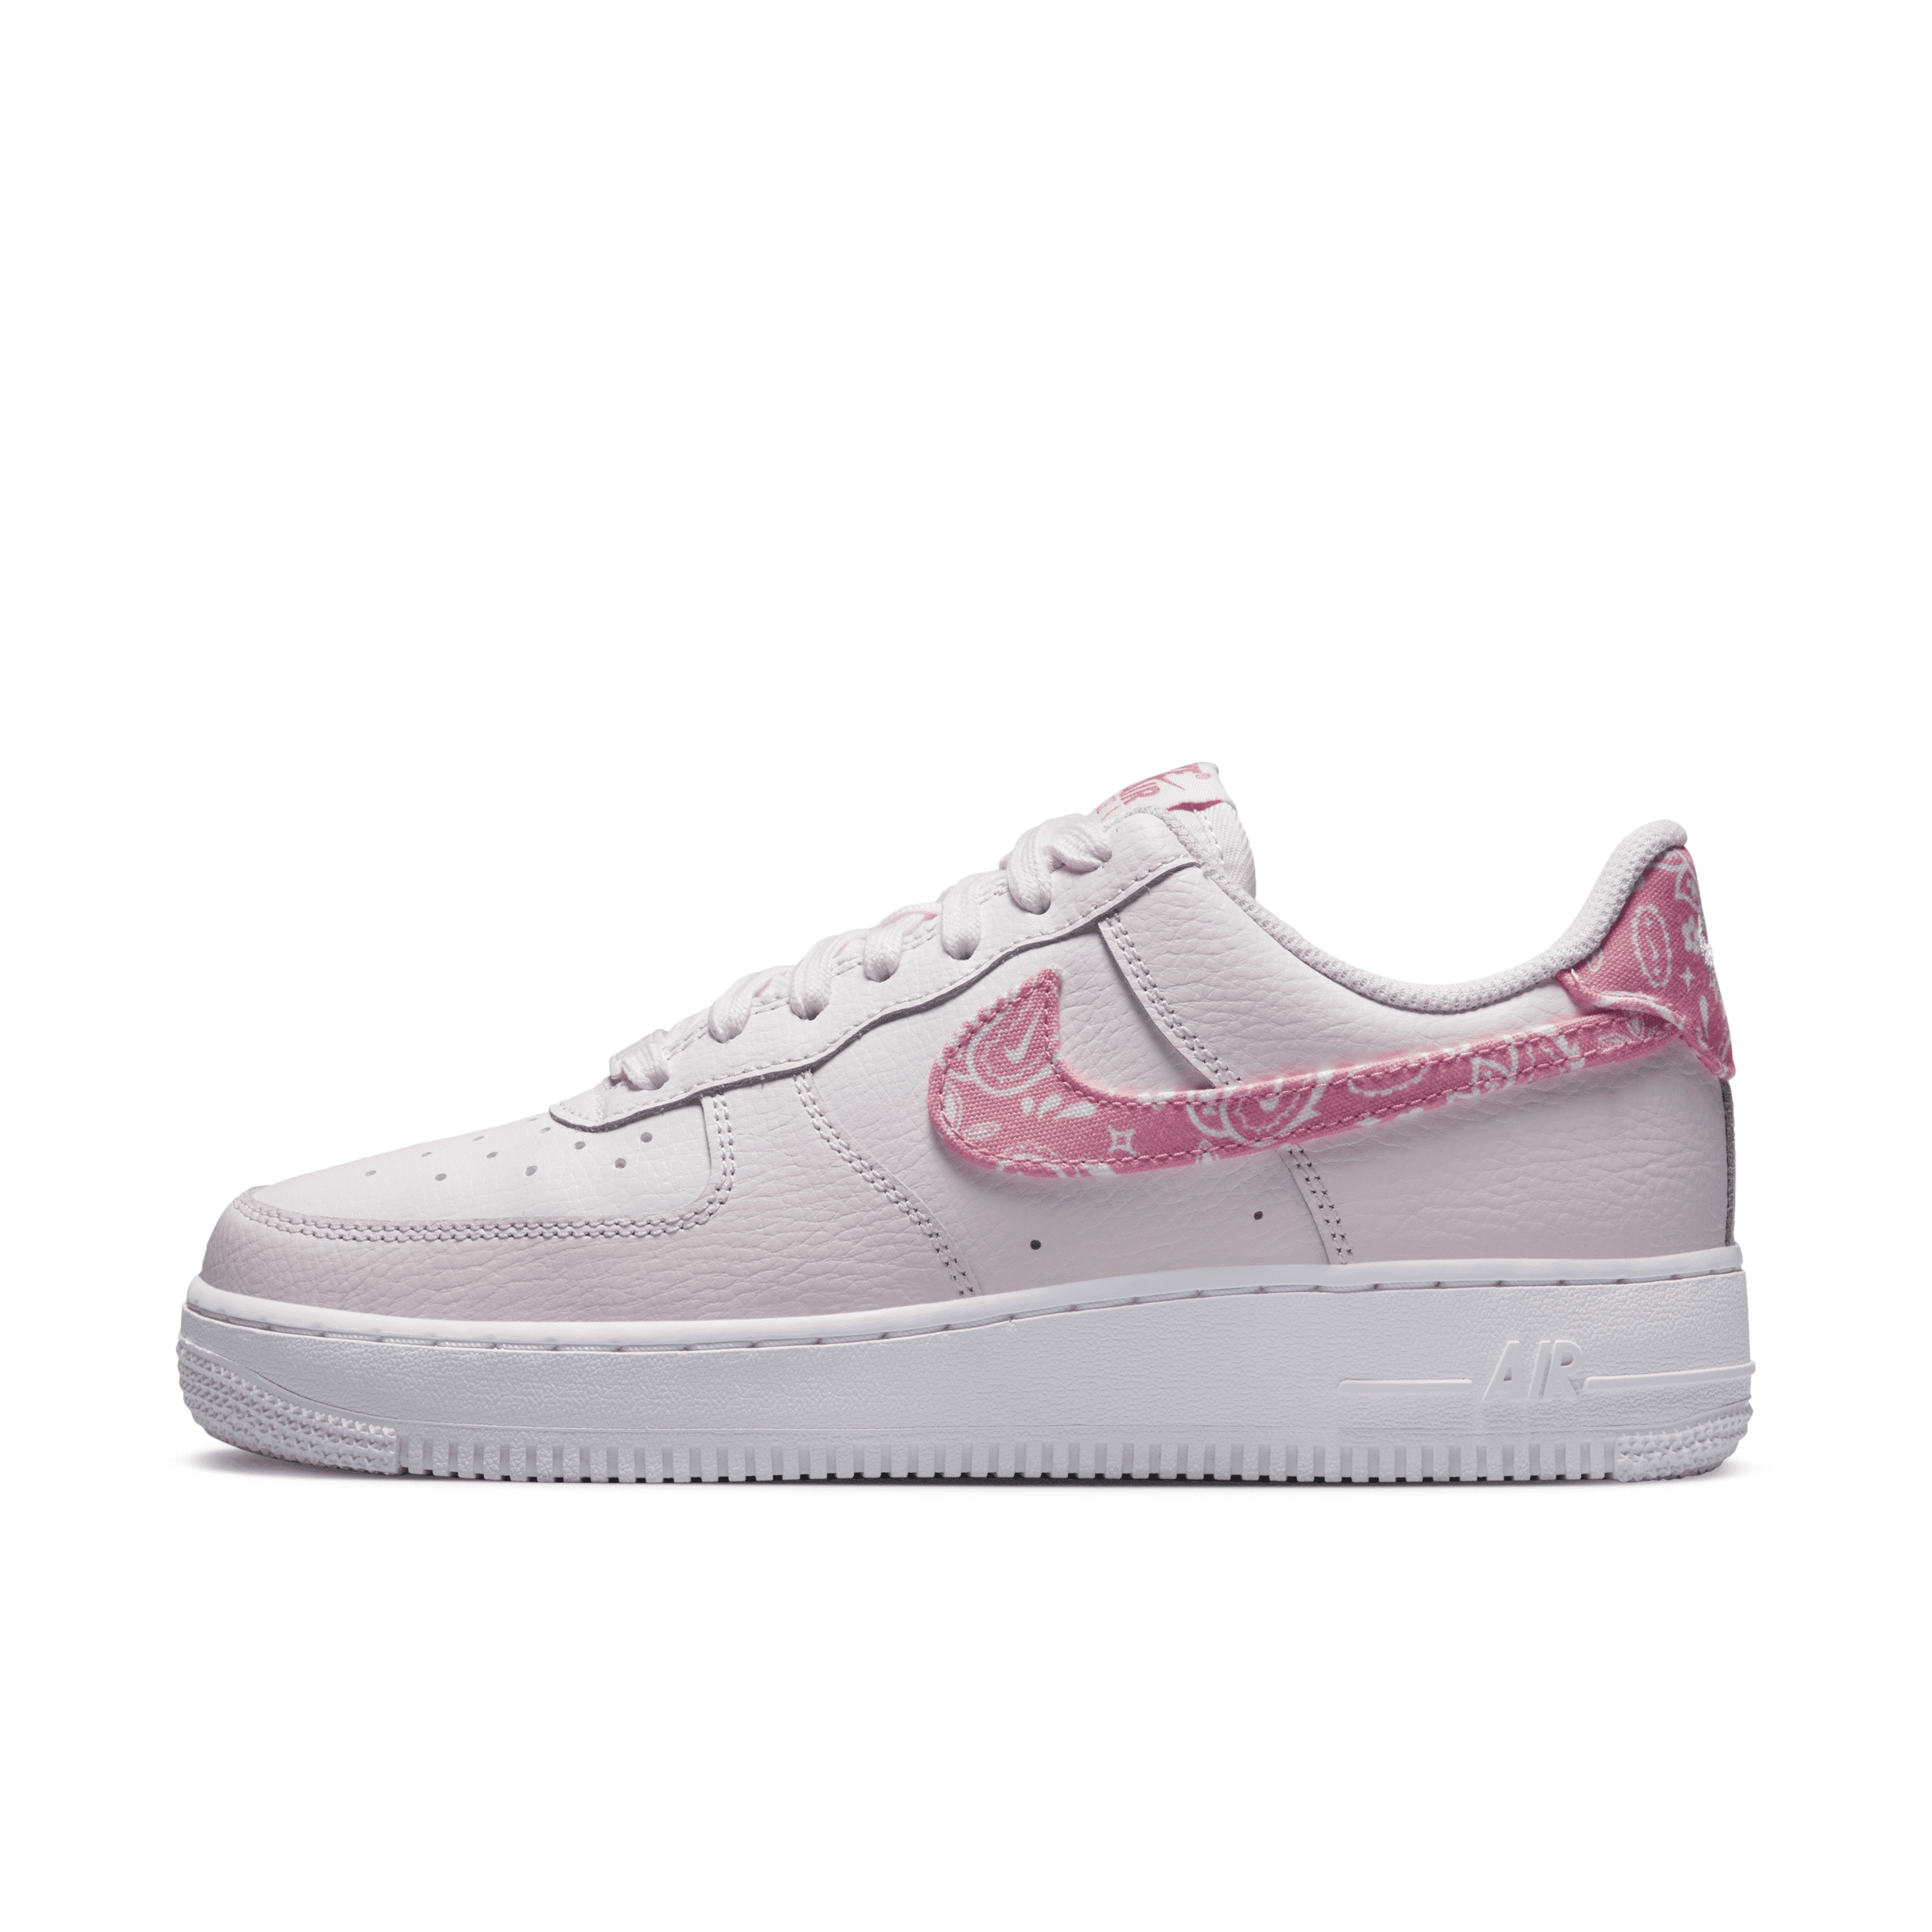 Nike Women's Air Force 1 '07 Shoes - 1